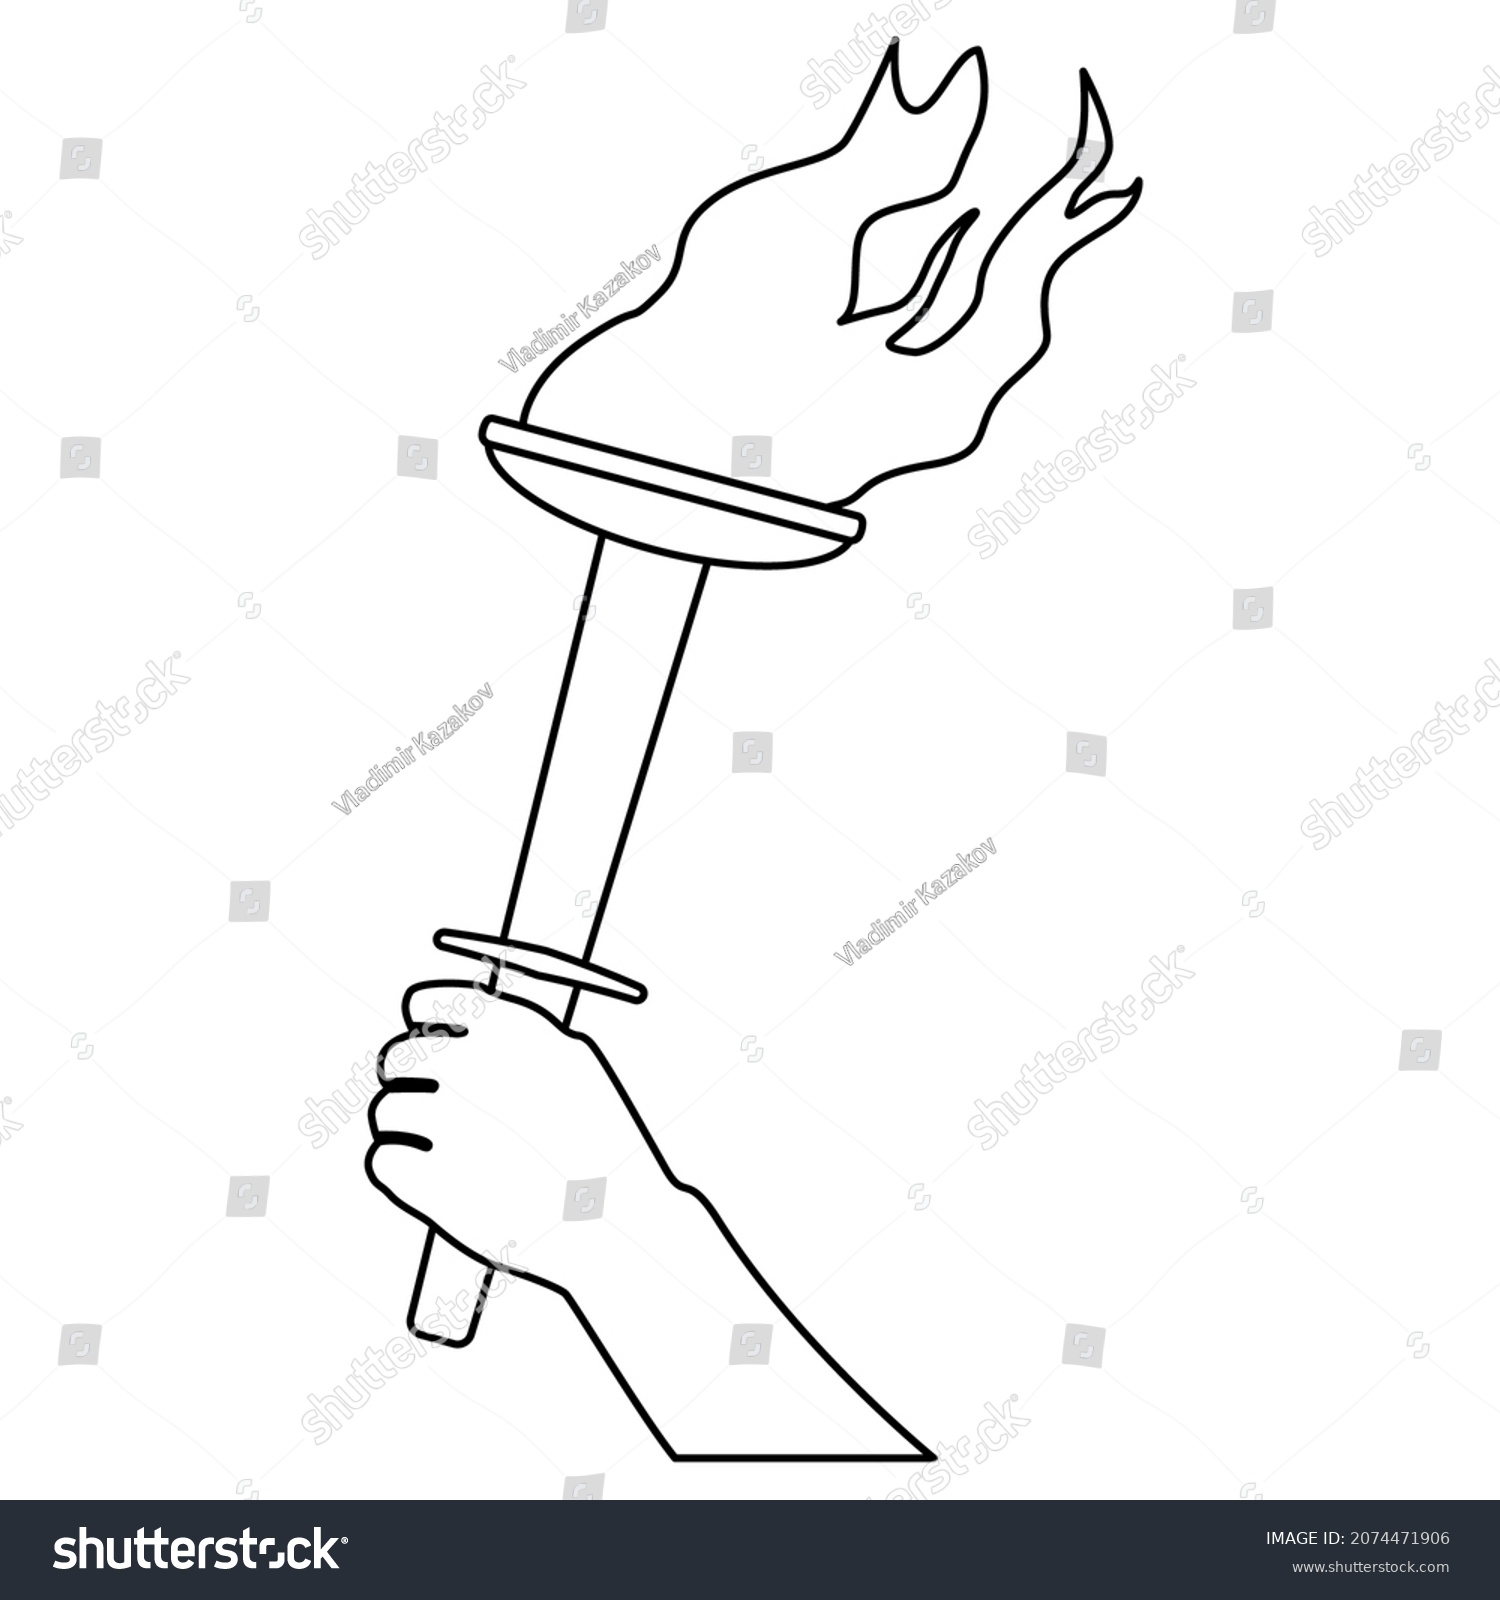 Burning Torch Hand Outline Isolated On Stock Vector (royalty Free 